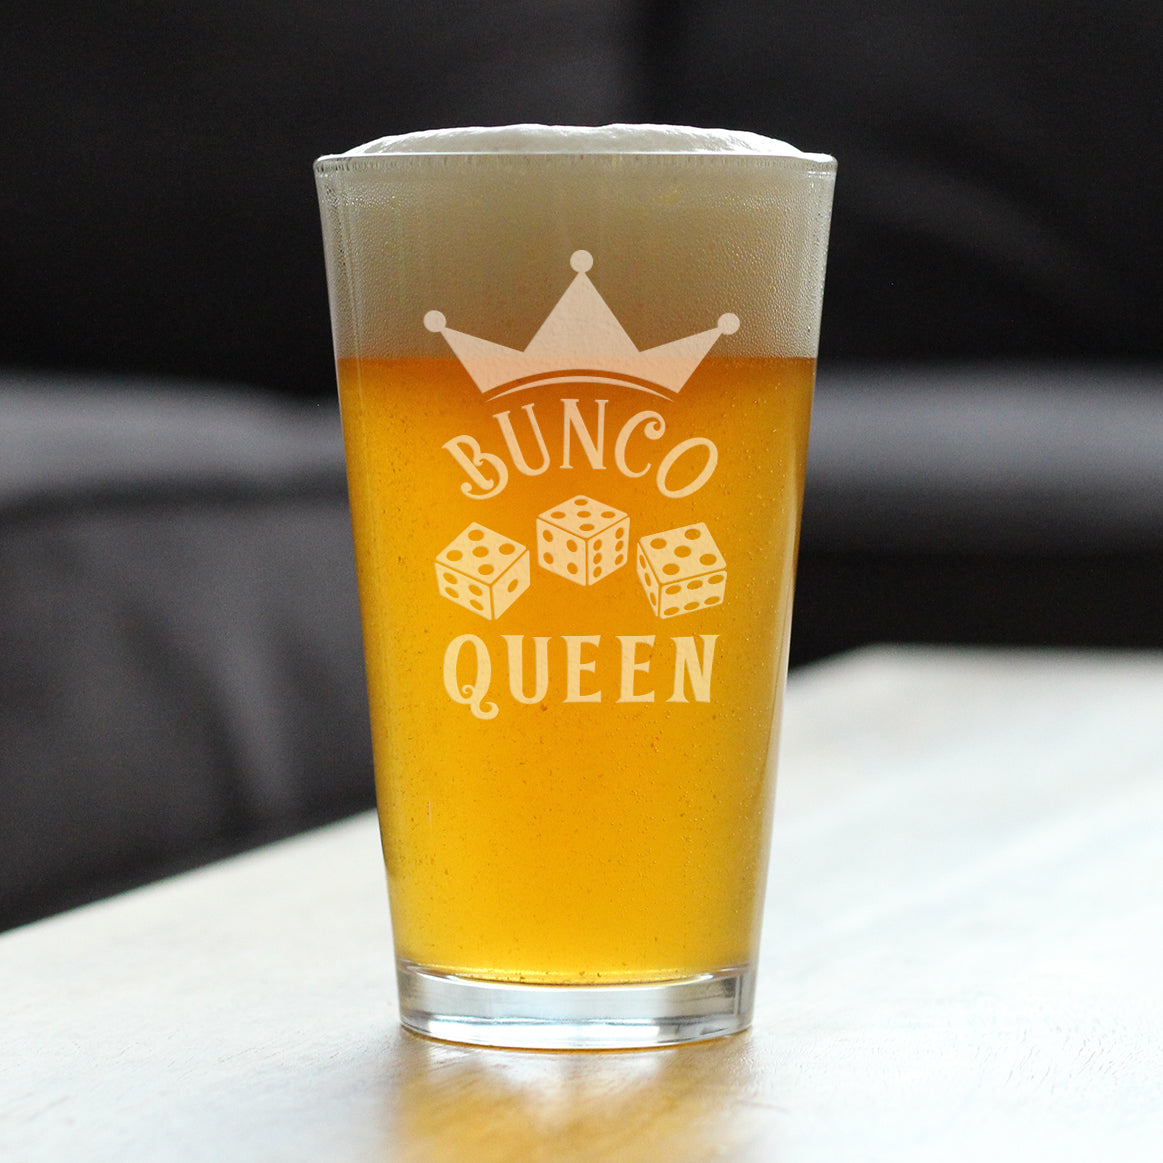 Bunco Queen Pint Glass for Beer - Bunco Decor and Bunco Gifts for Women - 16 Oz Glasses